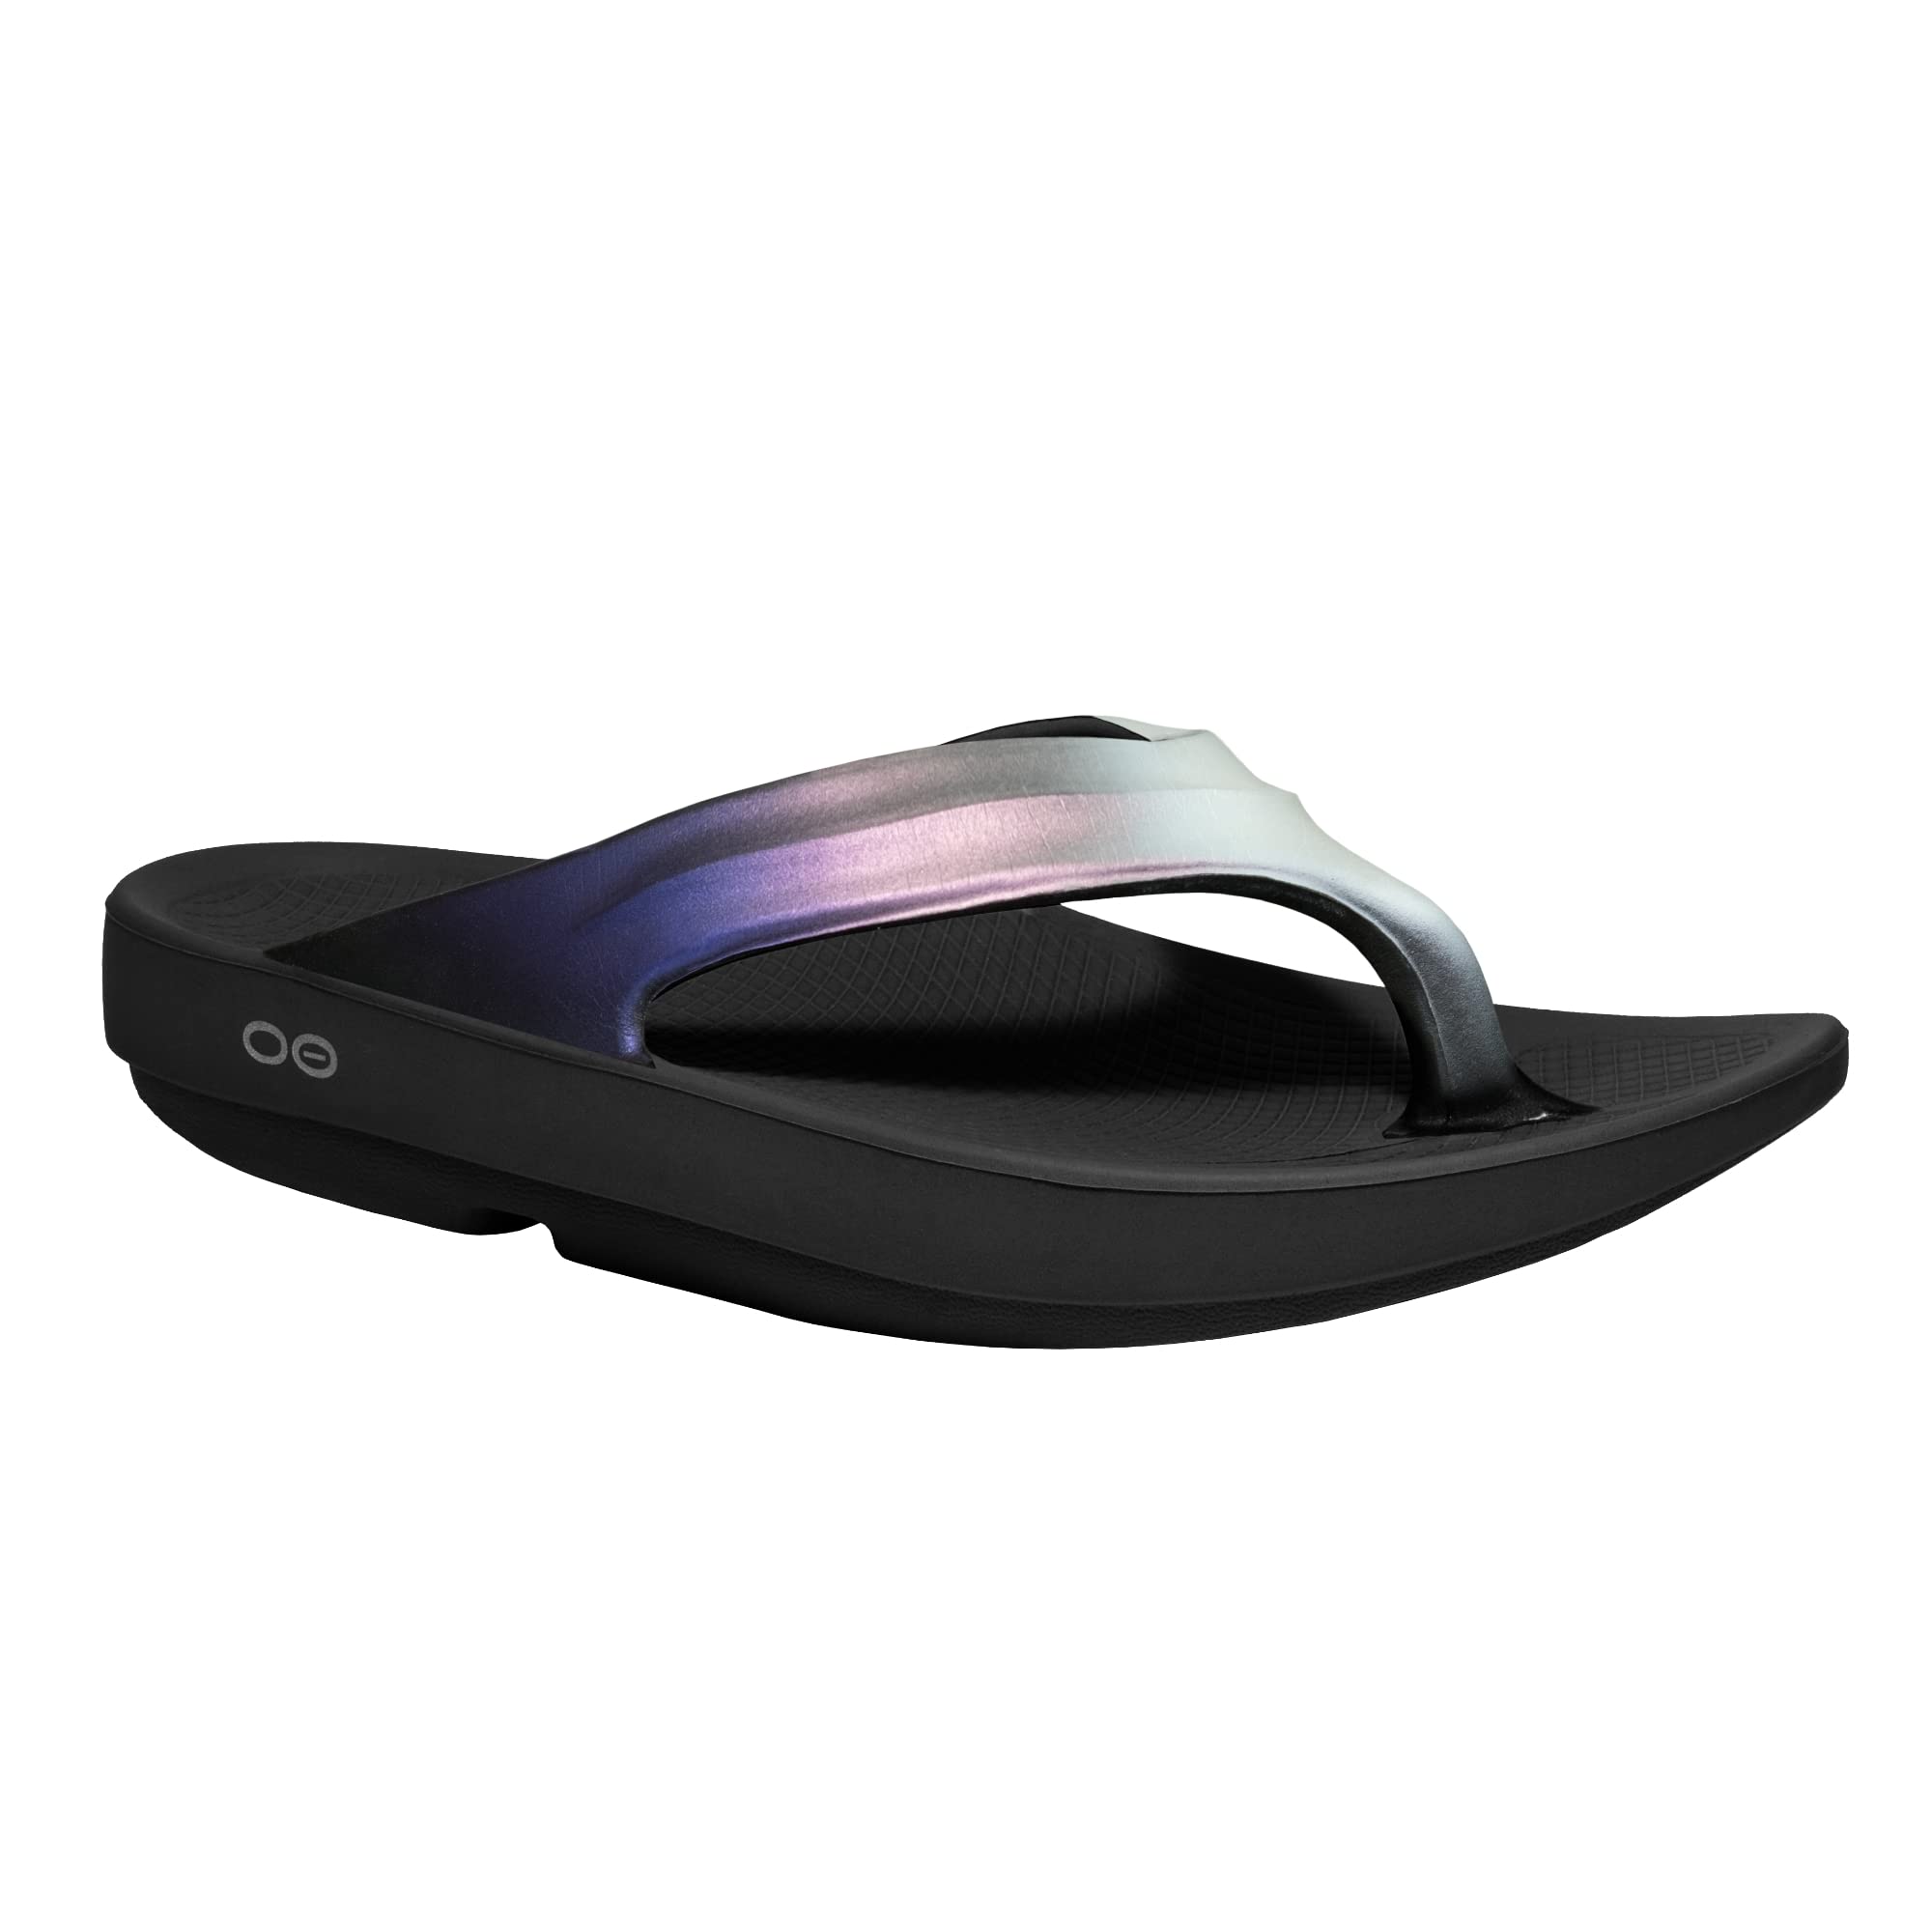 OOFOS OOlala Luxe Sandal, Calypso - Women’s Size 11 - Lightweight Recovery Footwear - Reduces Stress on Feet, Joints & Back - Machine Washable - Hand-Painted Treatment